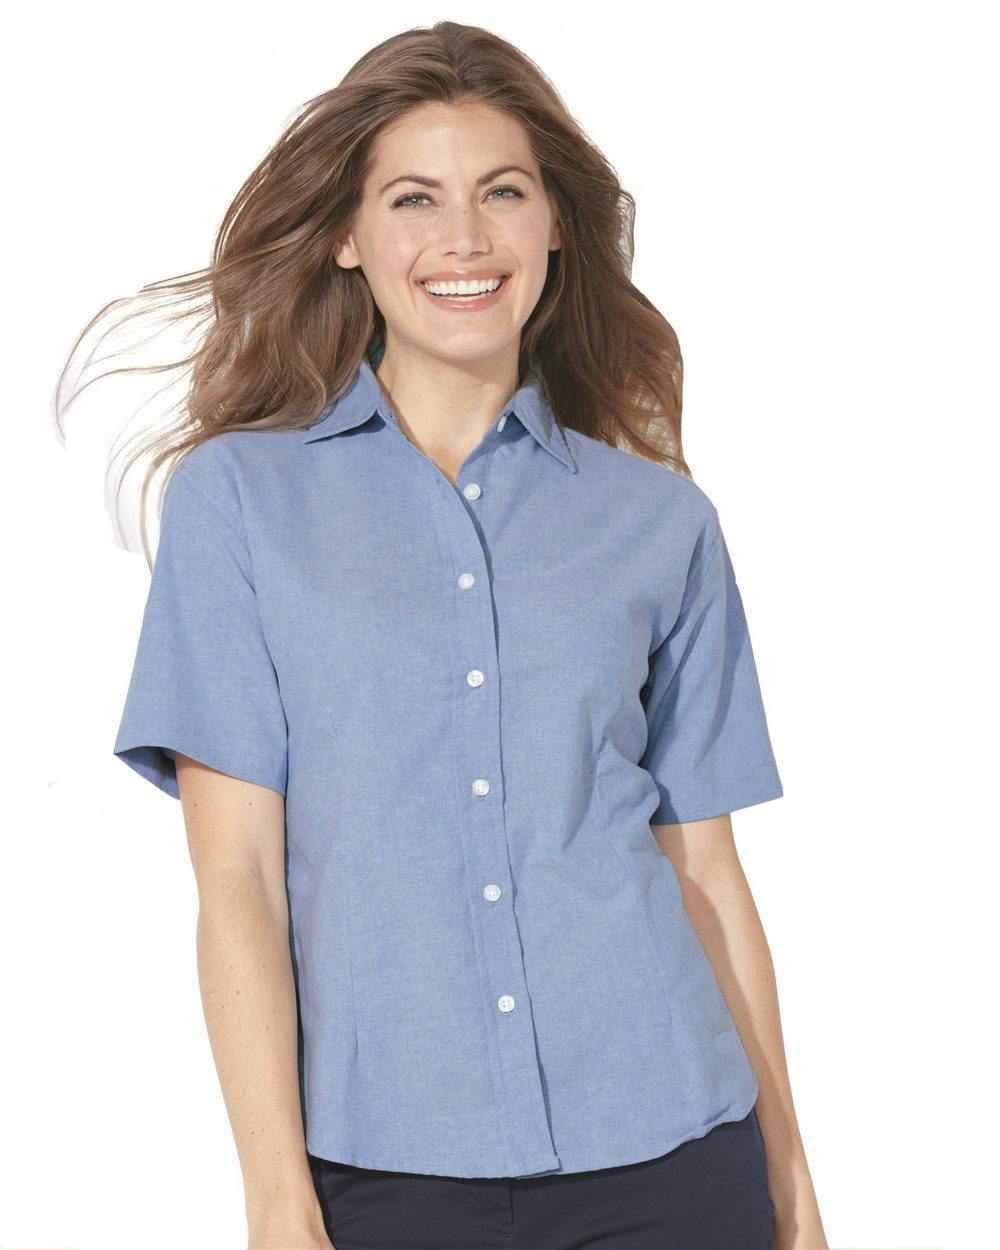 Image for Women's Short Sleeve Stain Resistant Oxford Shirt - 5231